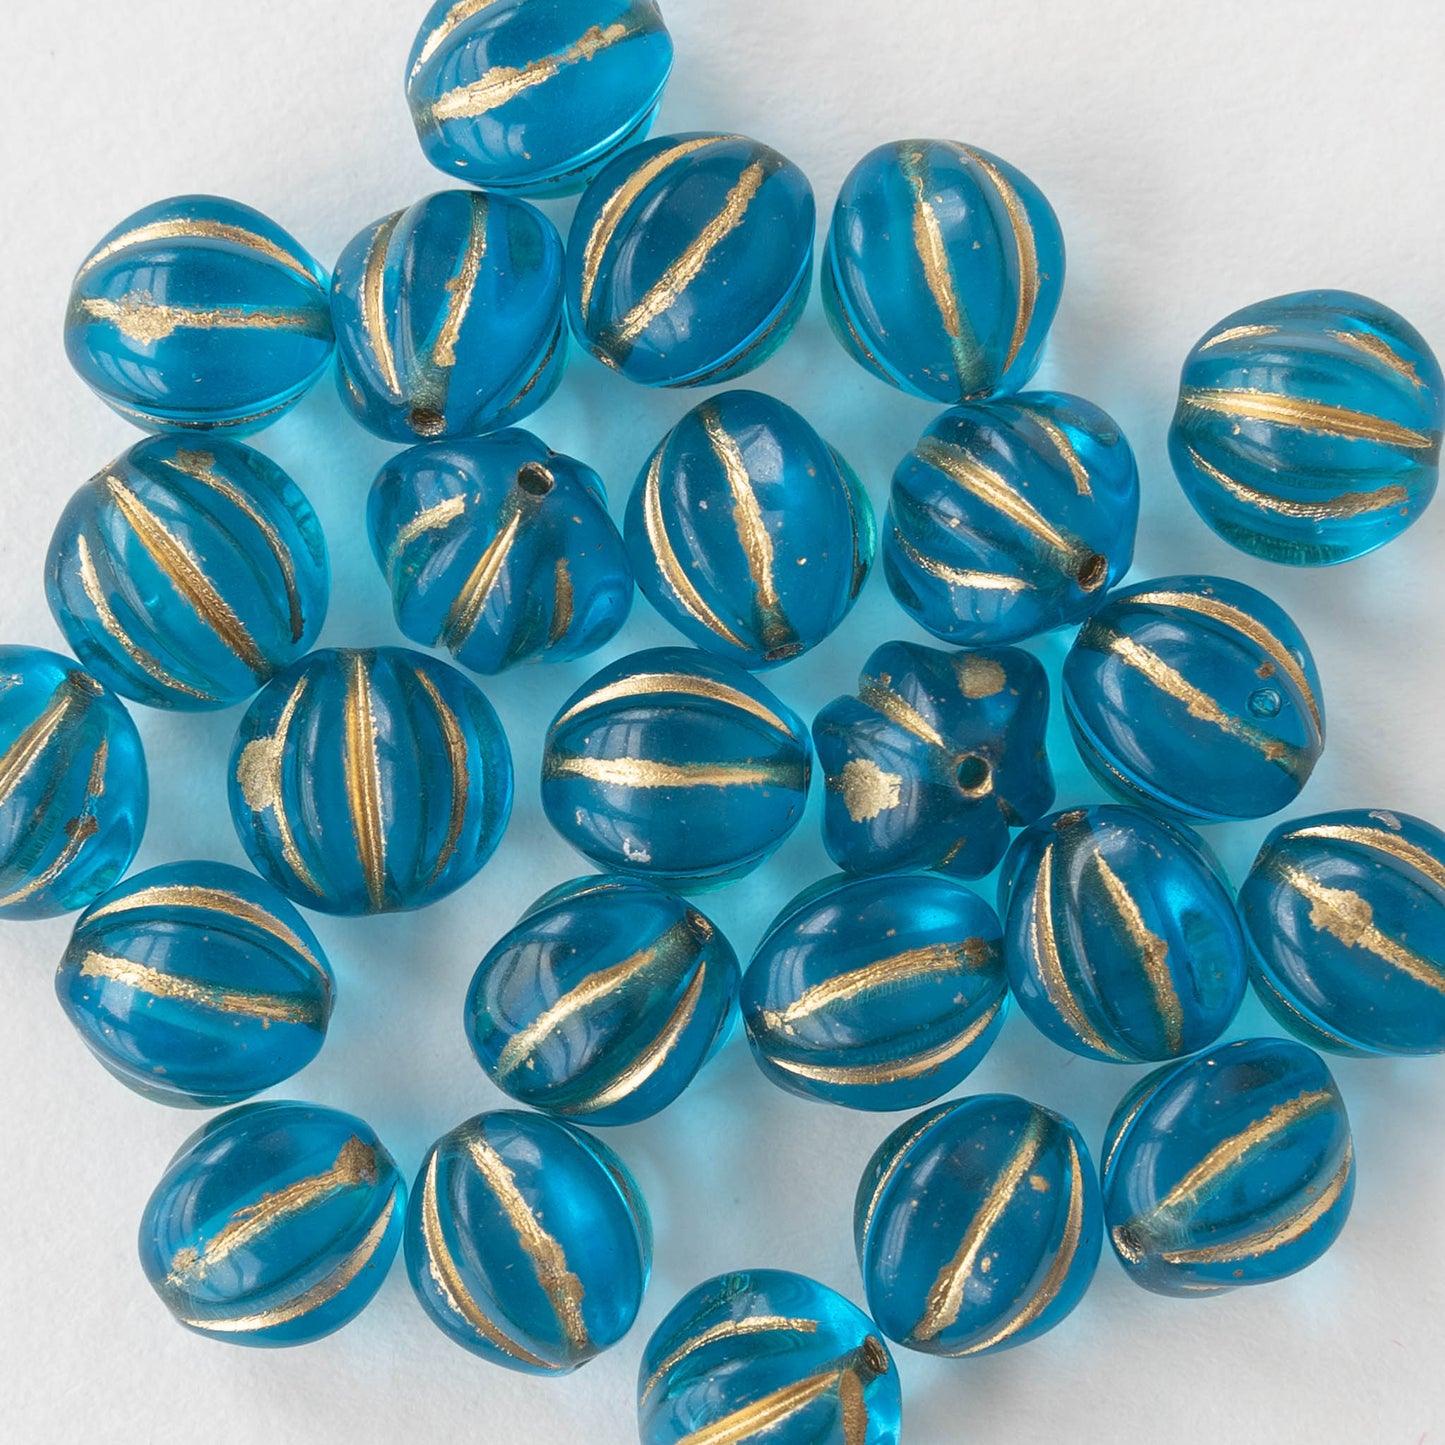 10mm Glass Melon Beads - Teal with Gold Wash - 25 beads